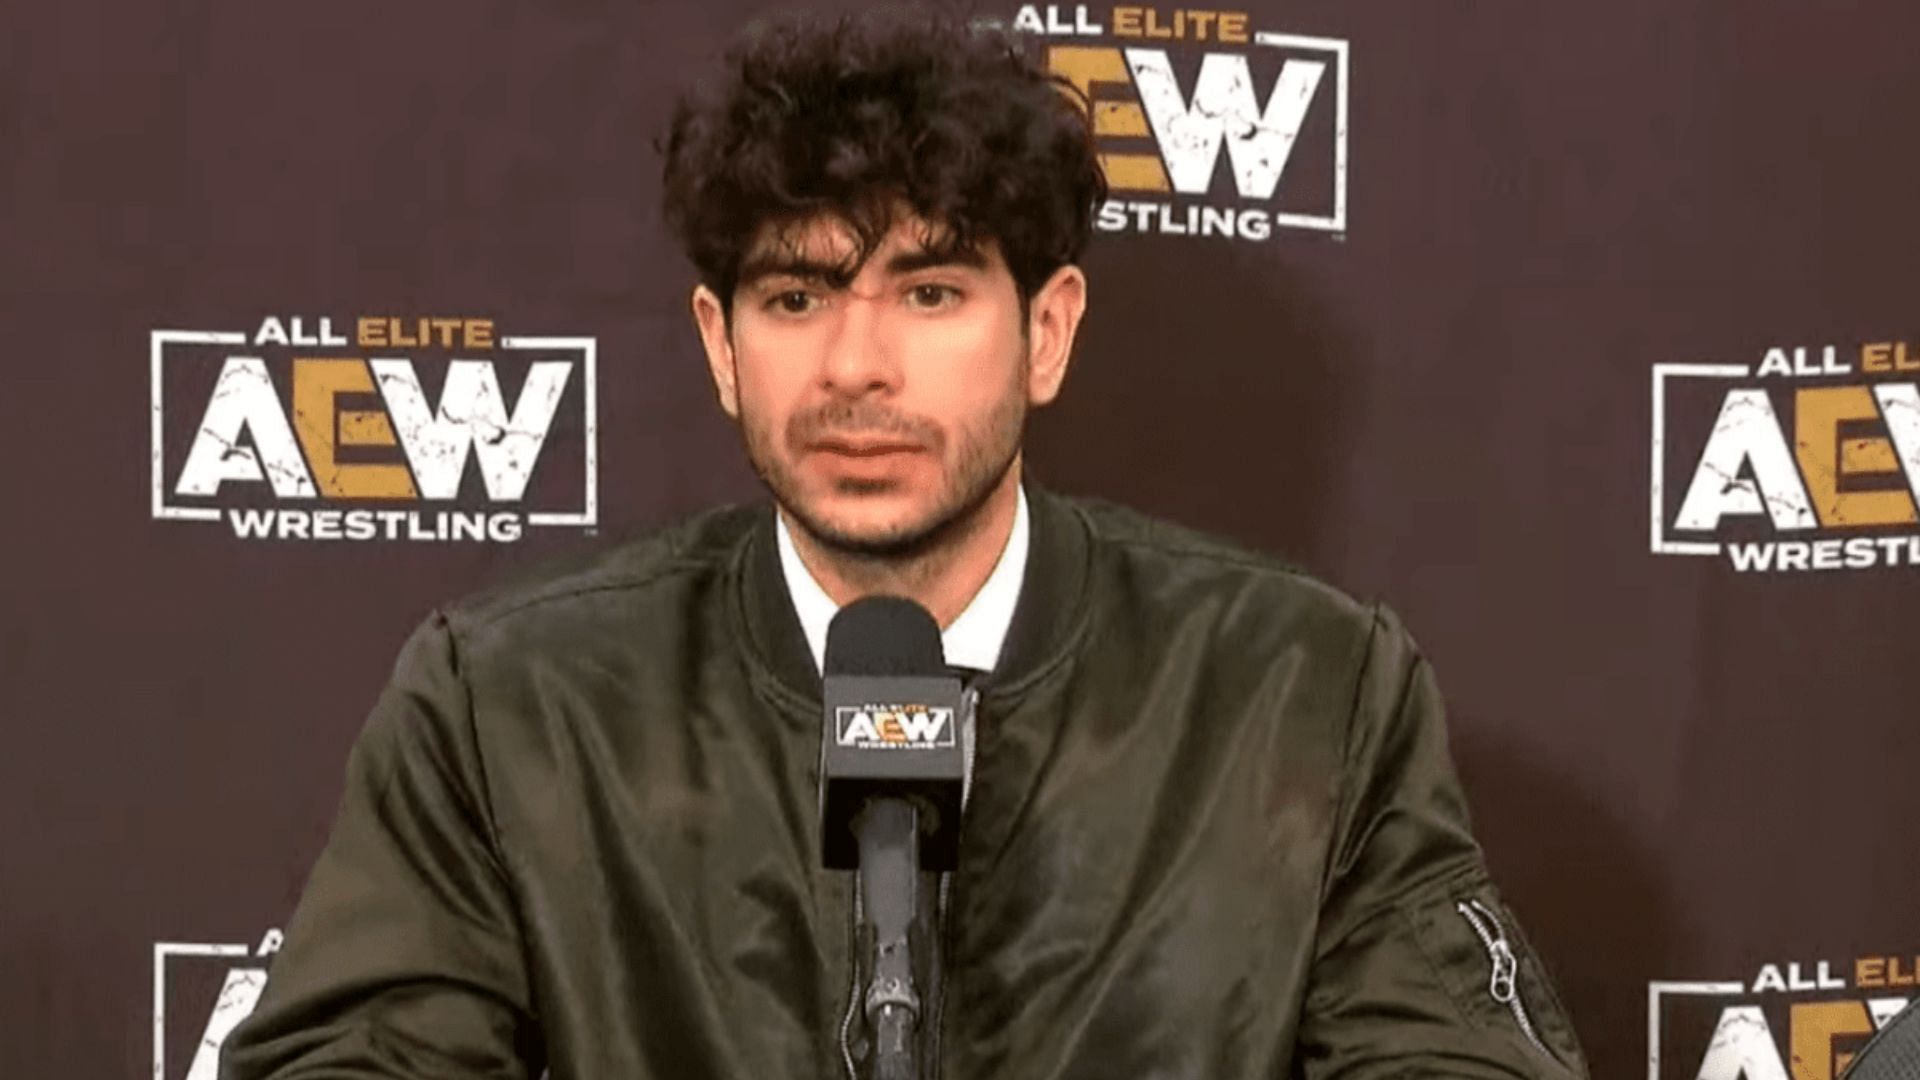 Reports suggest there are major issues with Tony Khan backstage